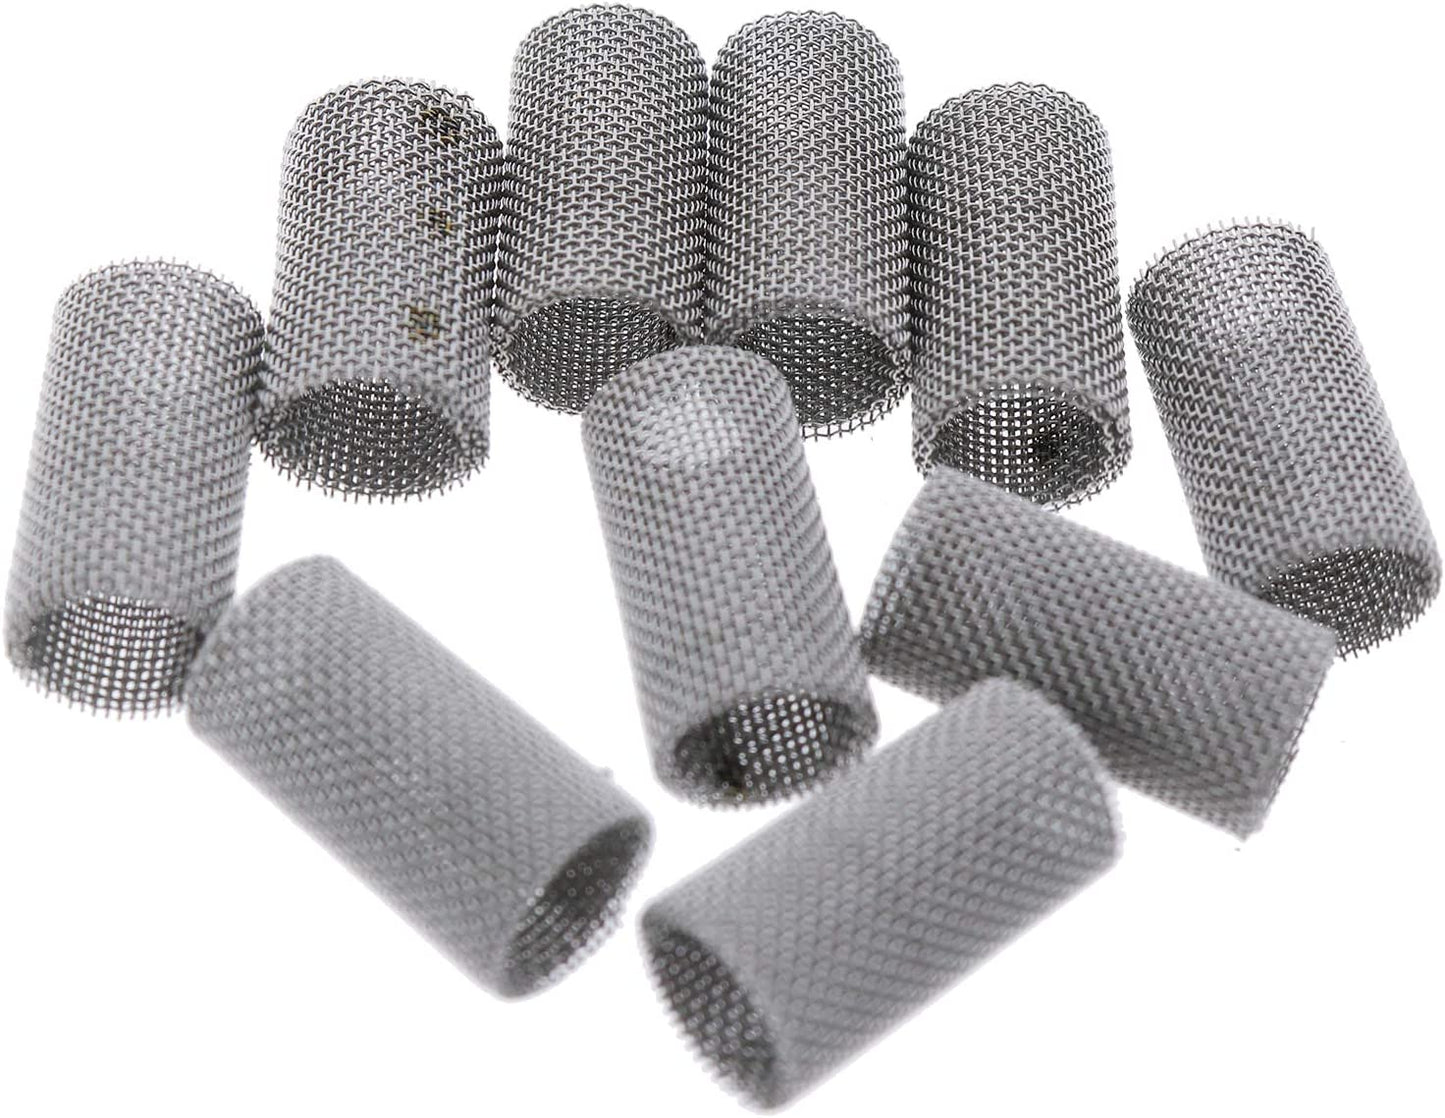 New 10PCS Stainless Steel Glow Pin Plug Burner Strainer Filter Screen 252069100102 for Eberspacher Heater Airtronic D2 D4 D4S